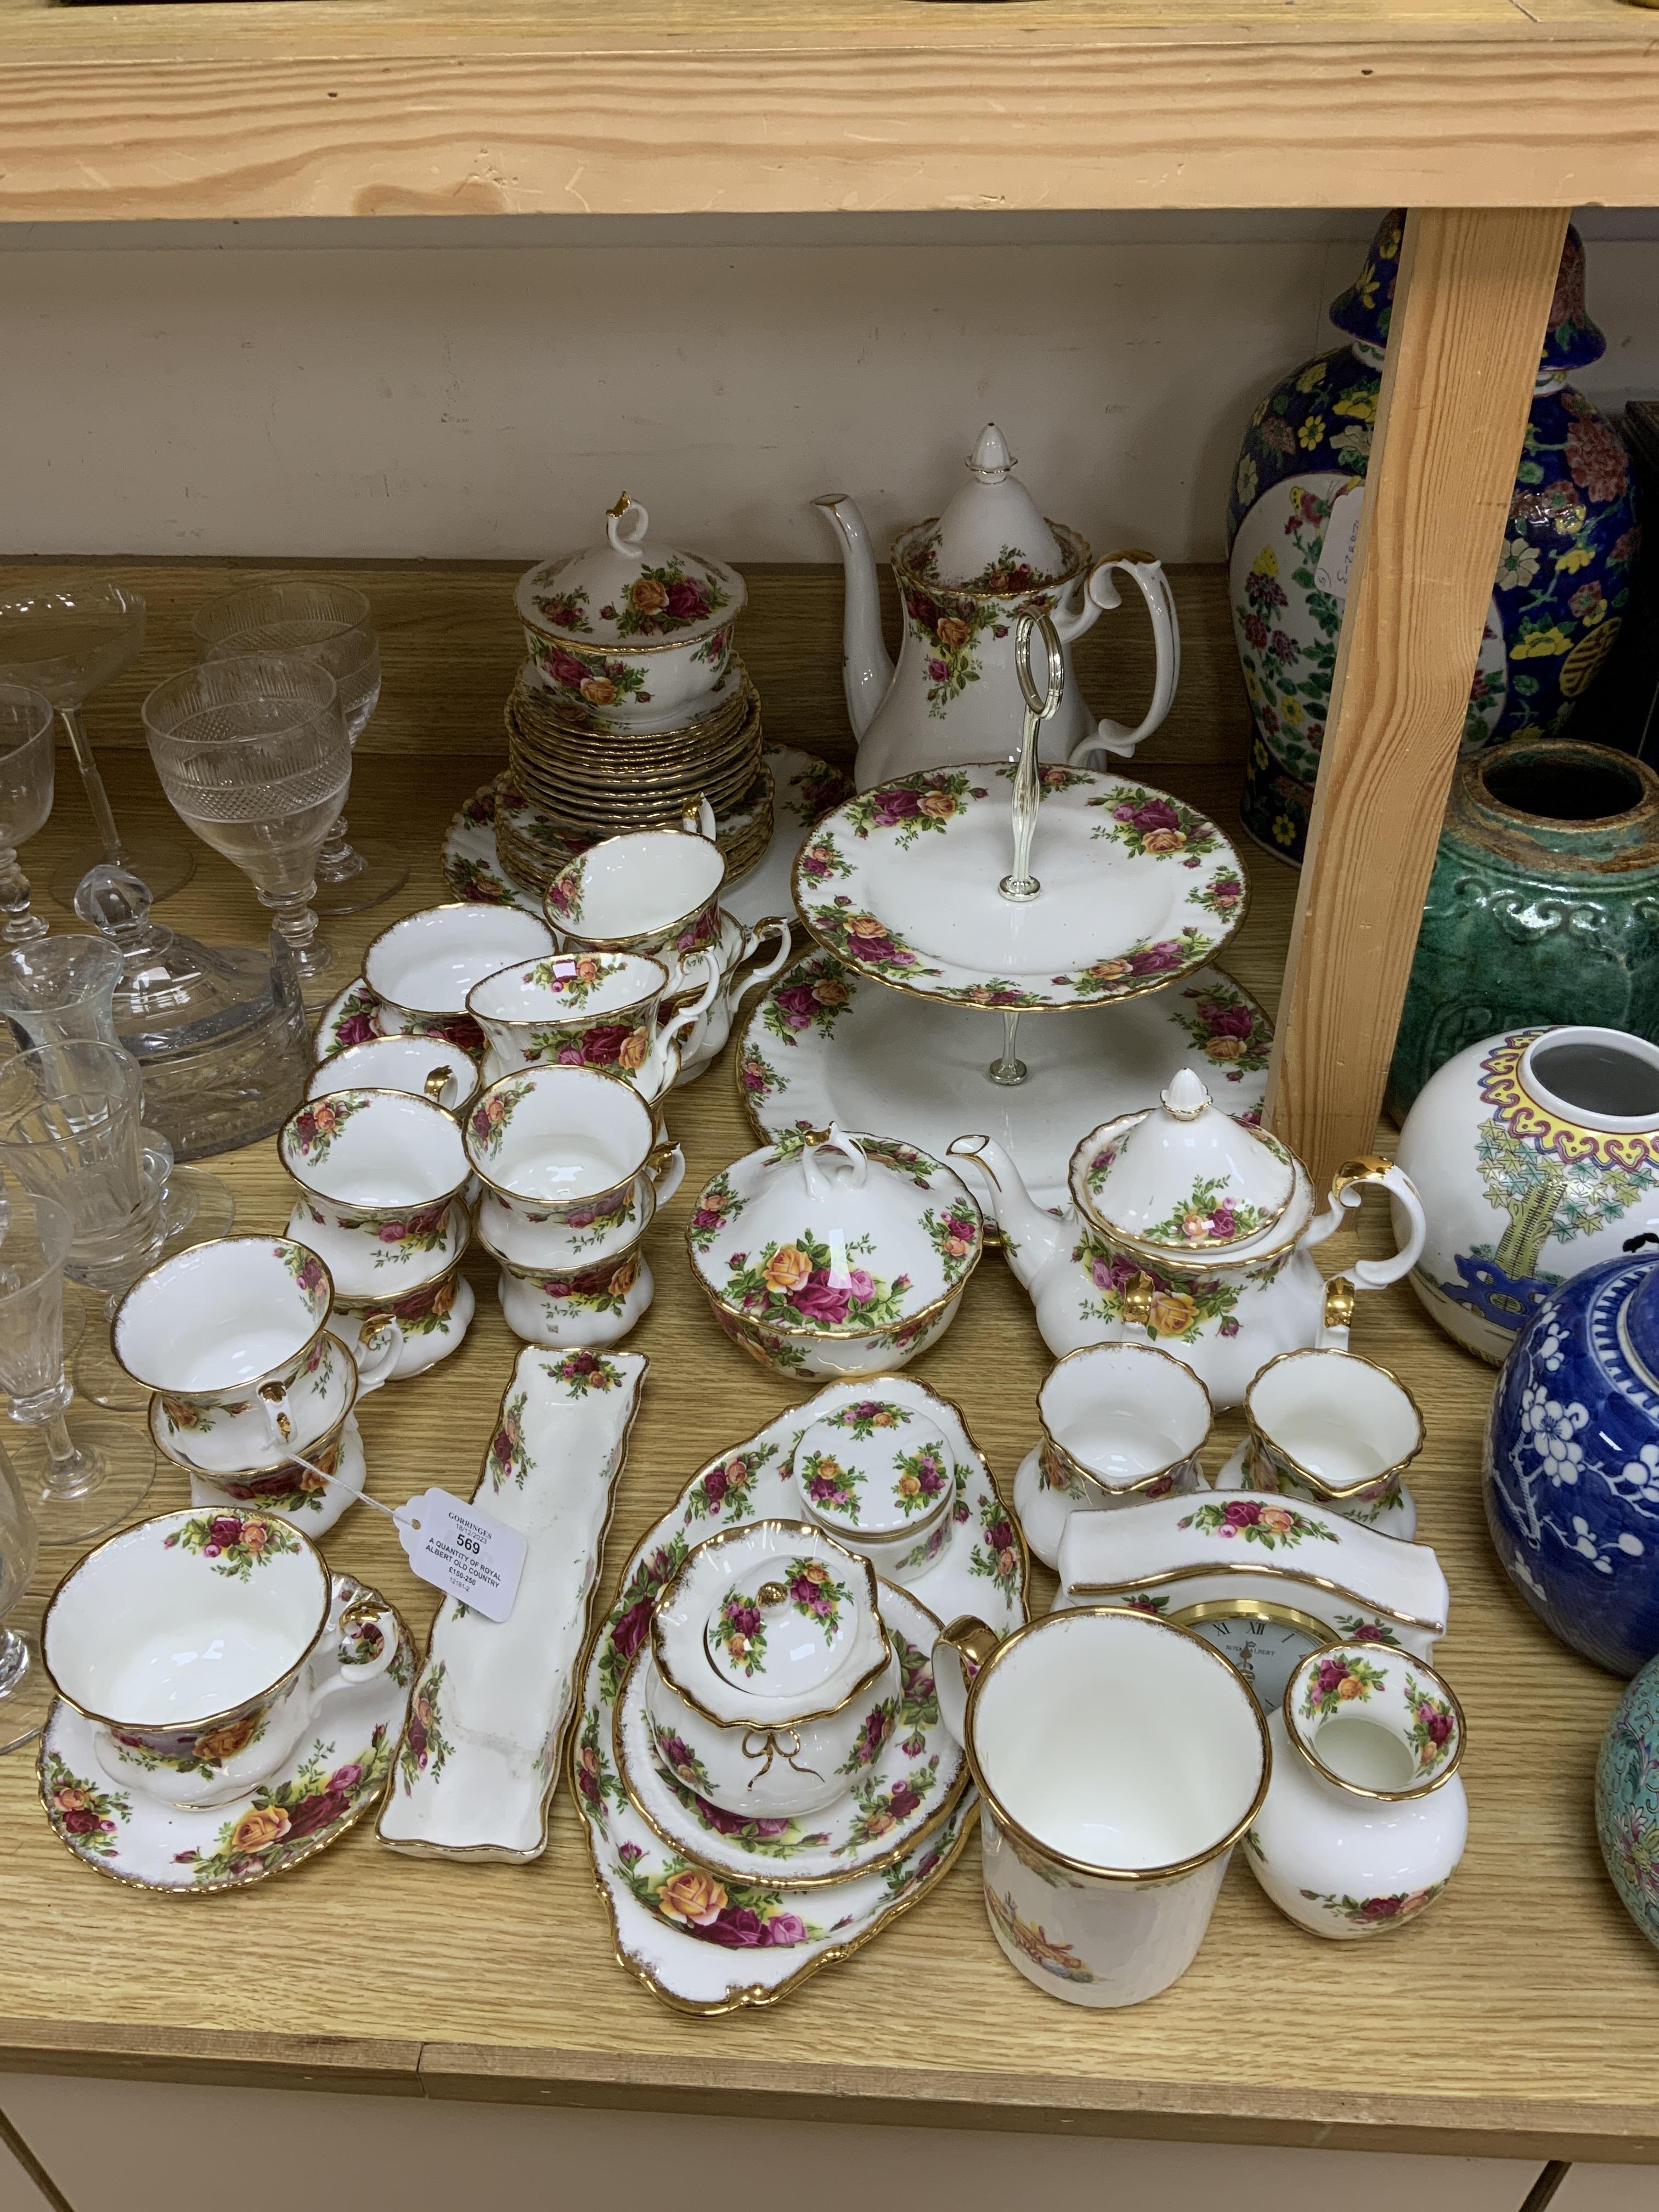 A quantity of Royal Albert old country roses pattern teawares including teapot, various cups and saucers, side plates, cake stand, coffee, pot, quartz, clock, sugar bowl, trays, etc.